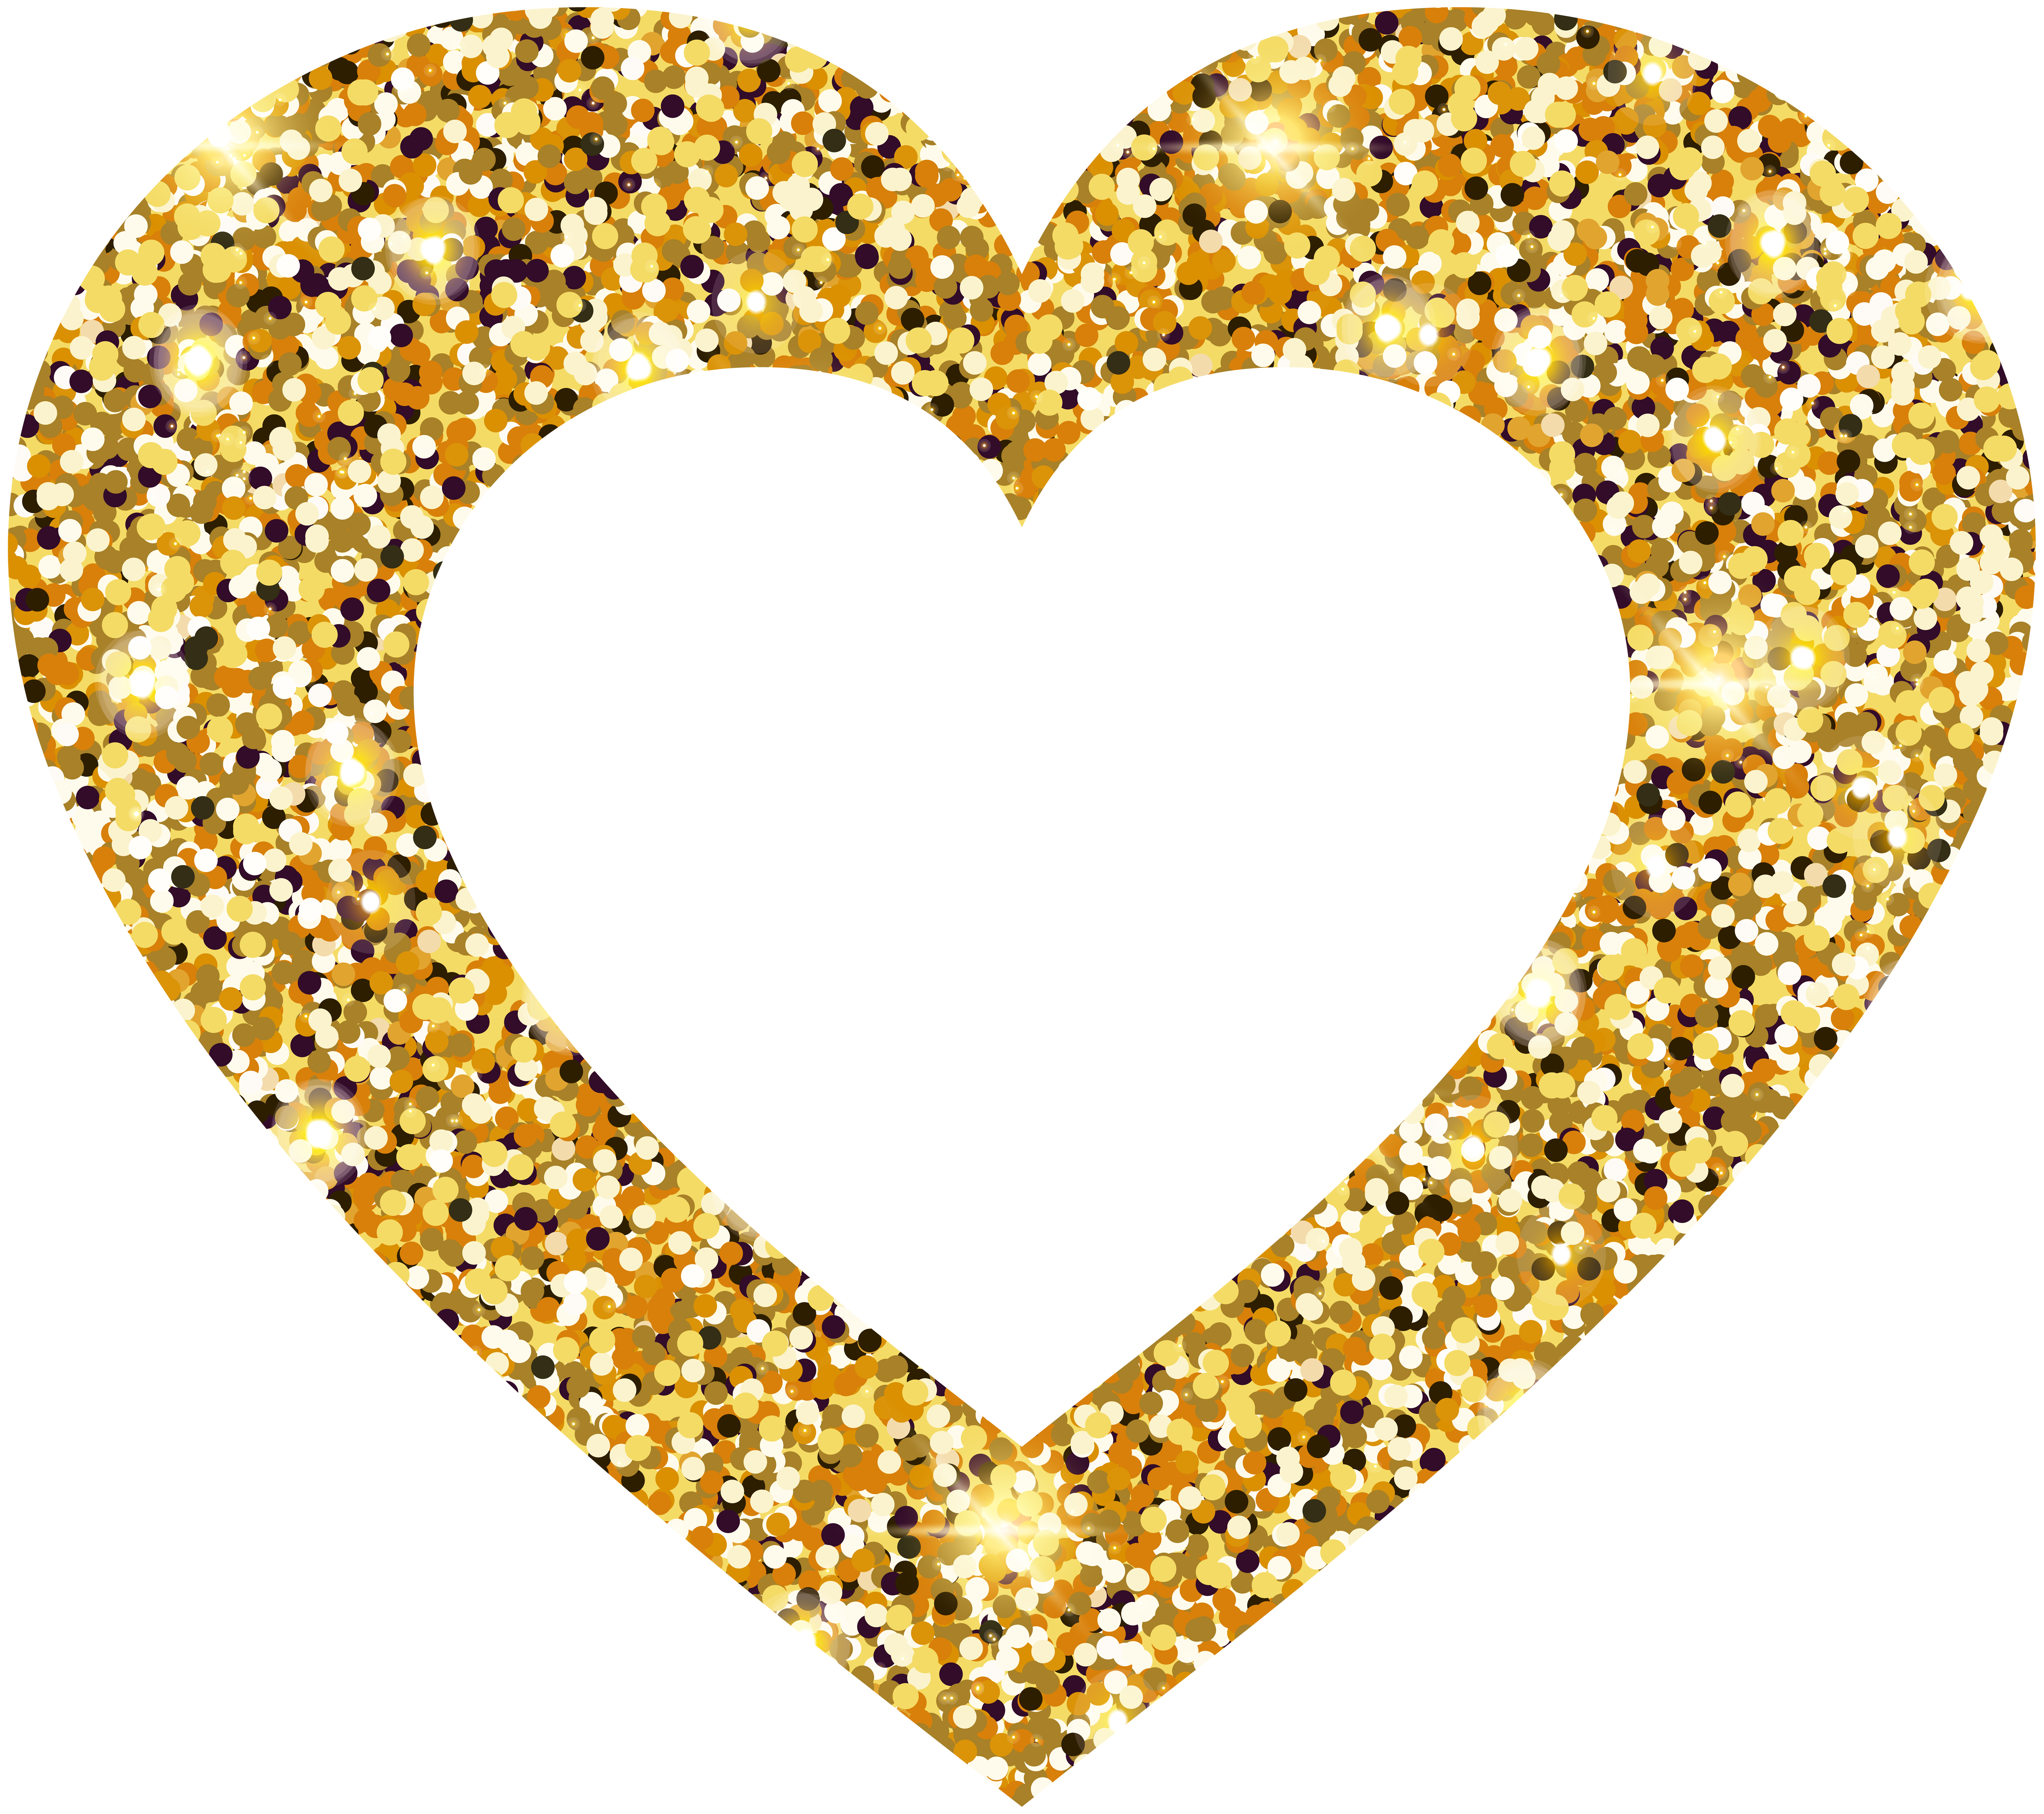 Golden Heart Transparent Clip Art Quality Image And Transparent PNG Free Clipart